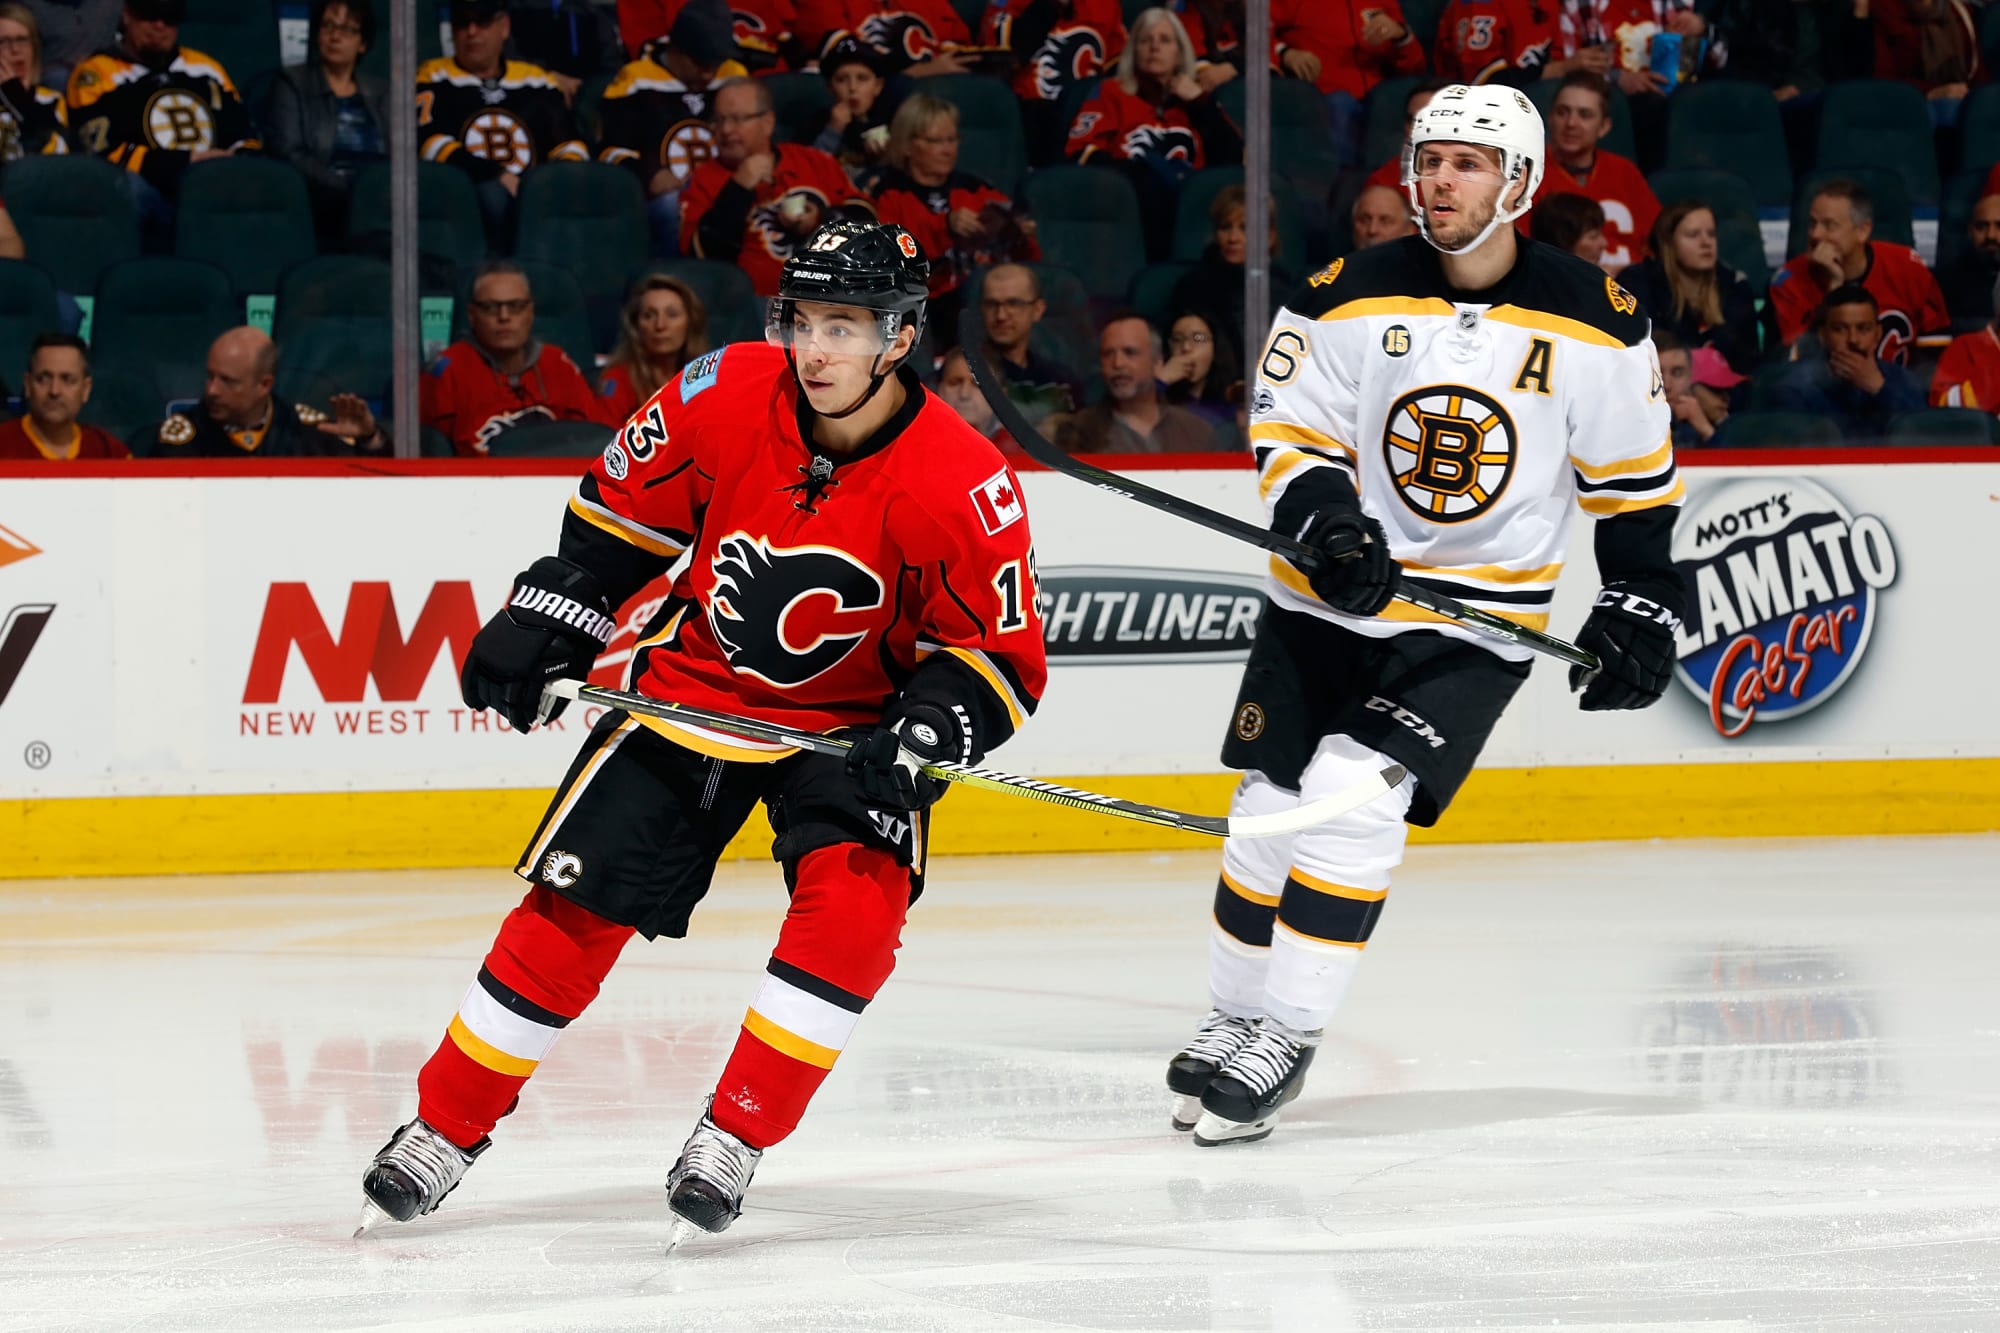 Boston Bruins: Don't play with fire against the Flames tonight